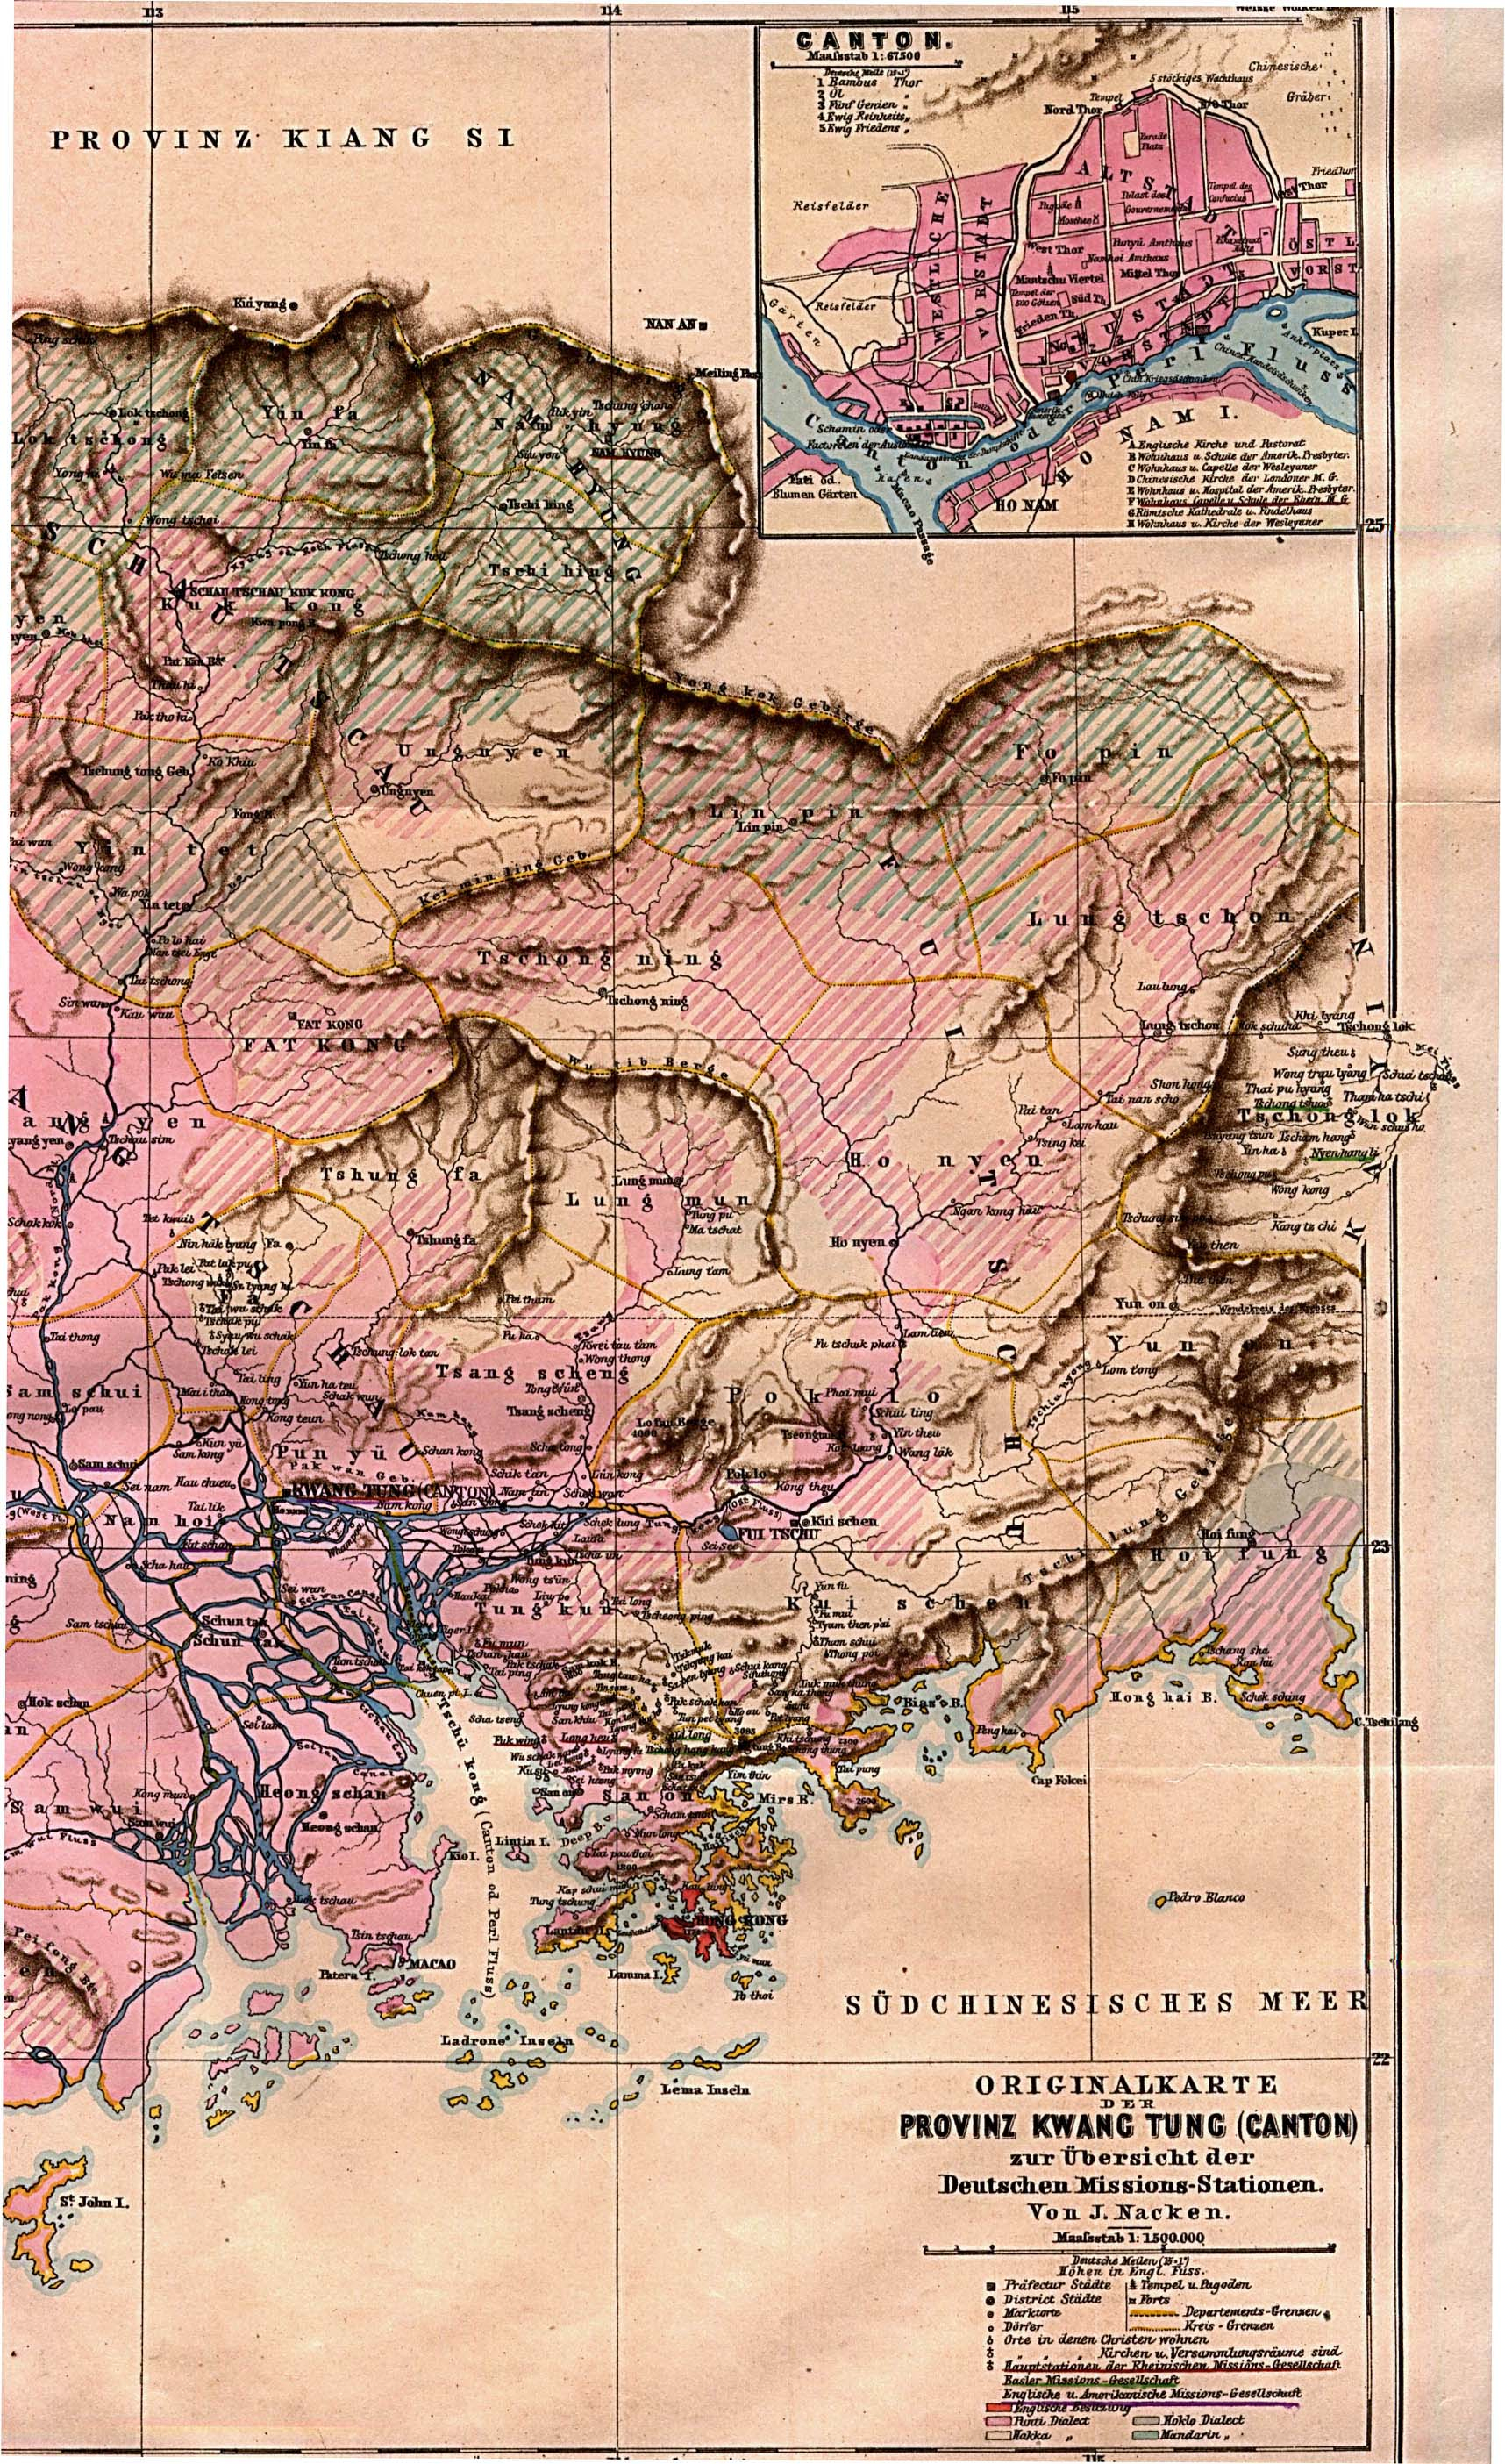 China Historical Maps - Perry-Castañeda Map Collection - Ut Library - Canton Texas Map